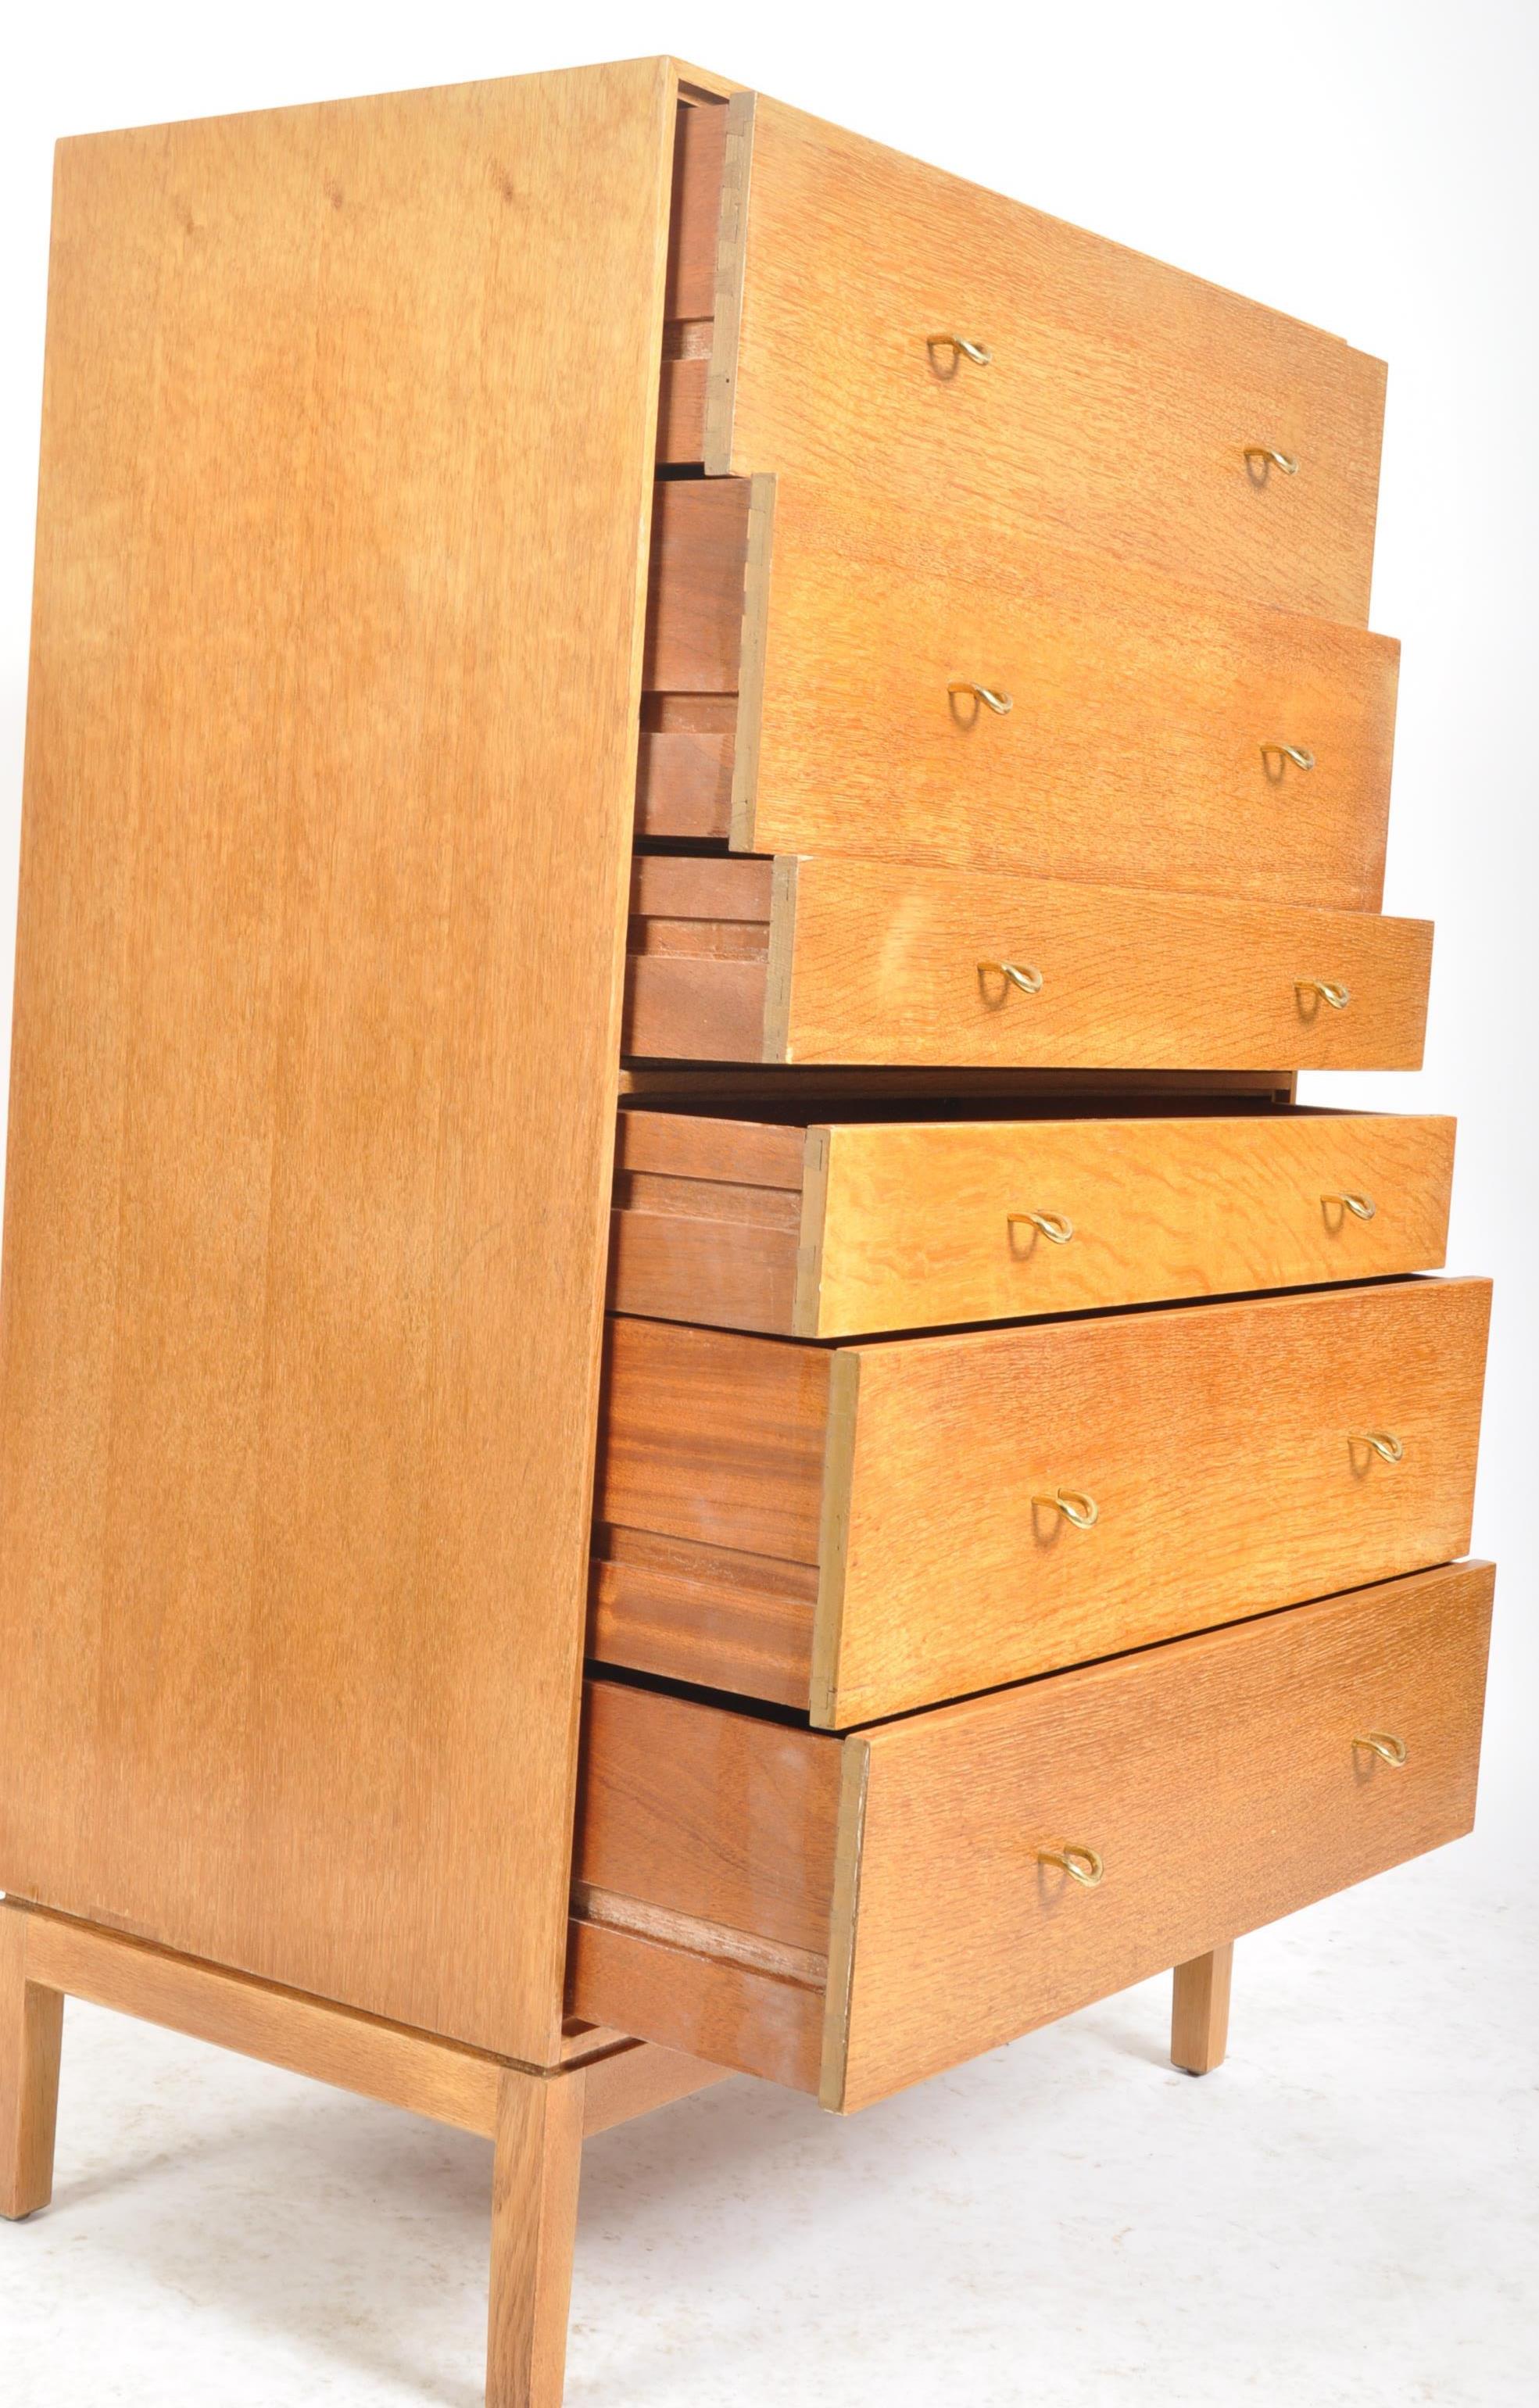 JOHN & SYLVIA REID FOR STAG - MID CENTURY OAK CHEST OF DRAWERS - Image 3 of 6